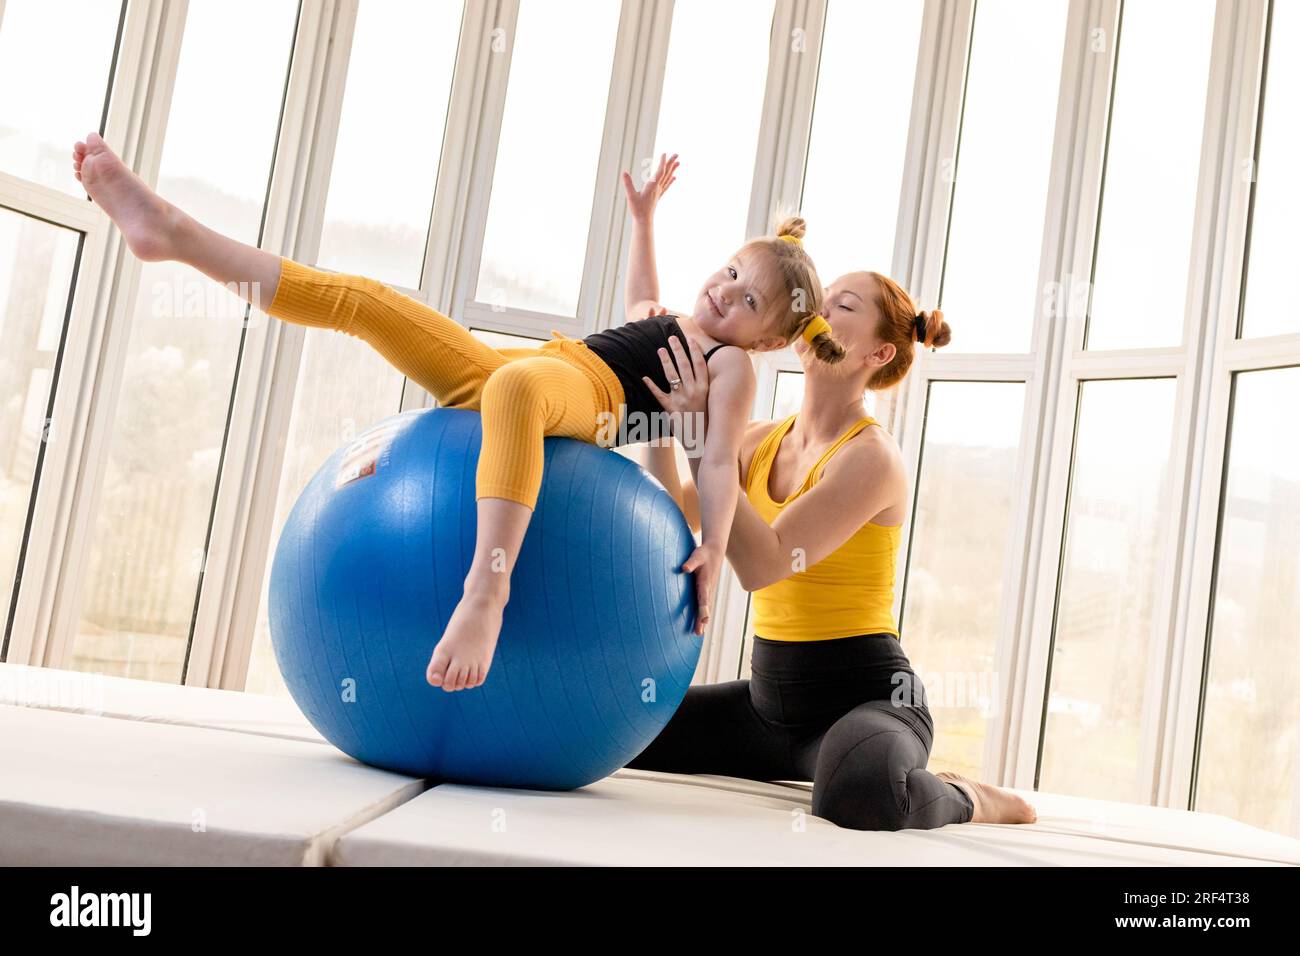 Young fit mom and her daughter having fun with fitness ball in a gym Stock Photo